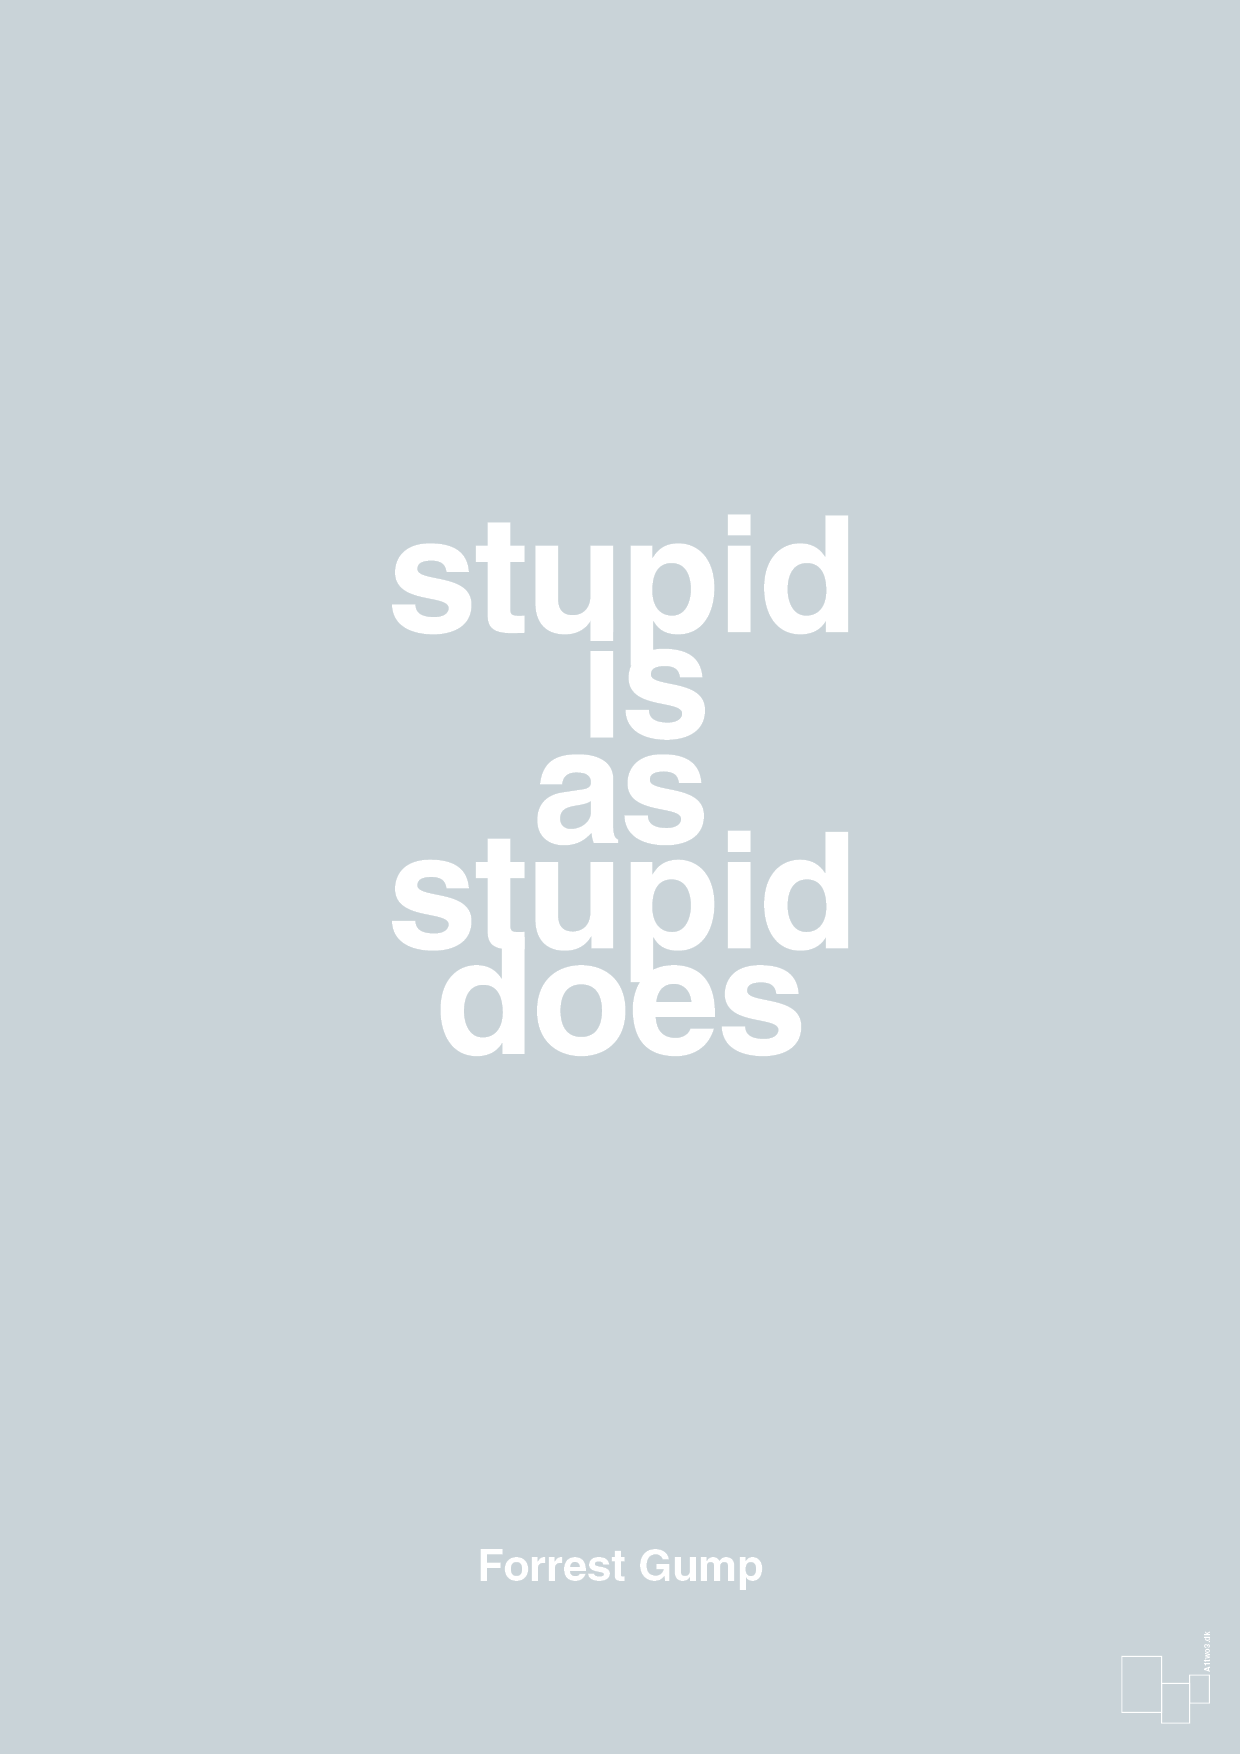 stupid is as stupid does - Plakat med Citater i Light Drizzle